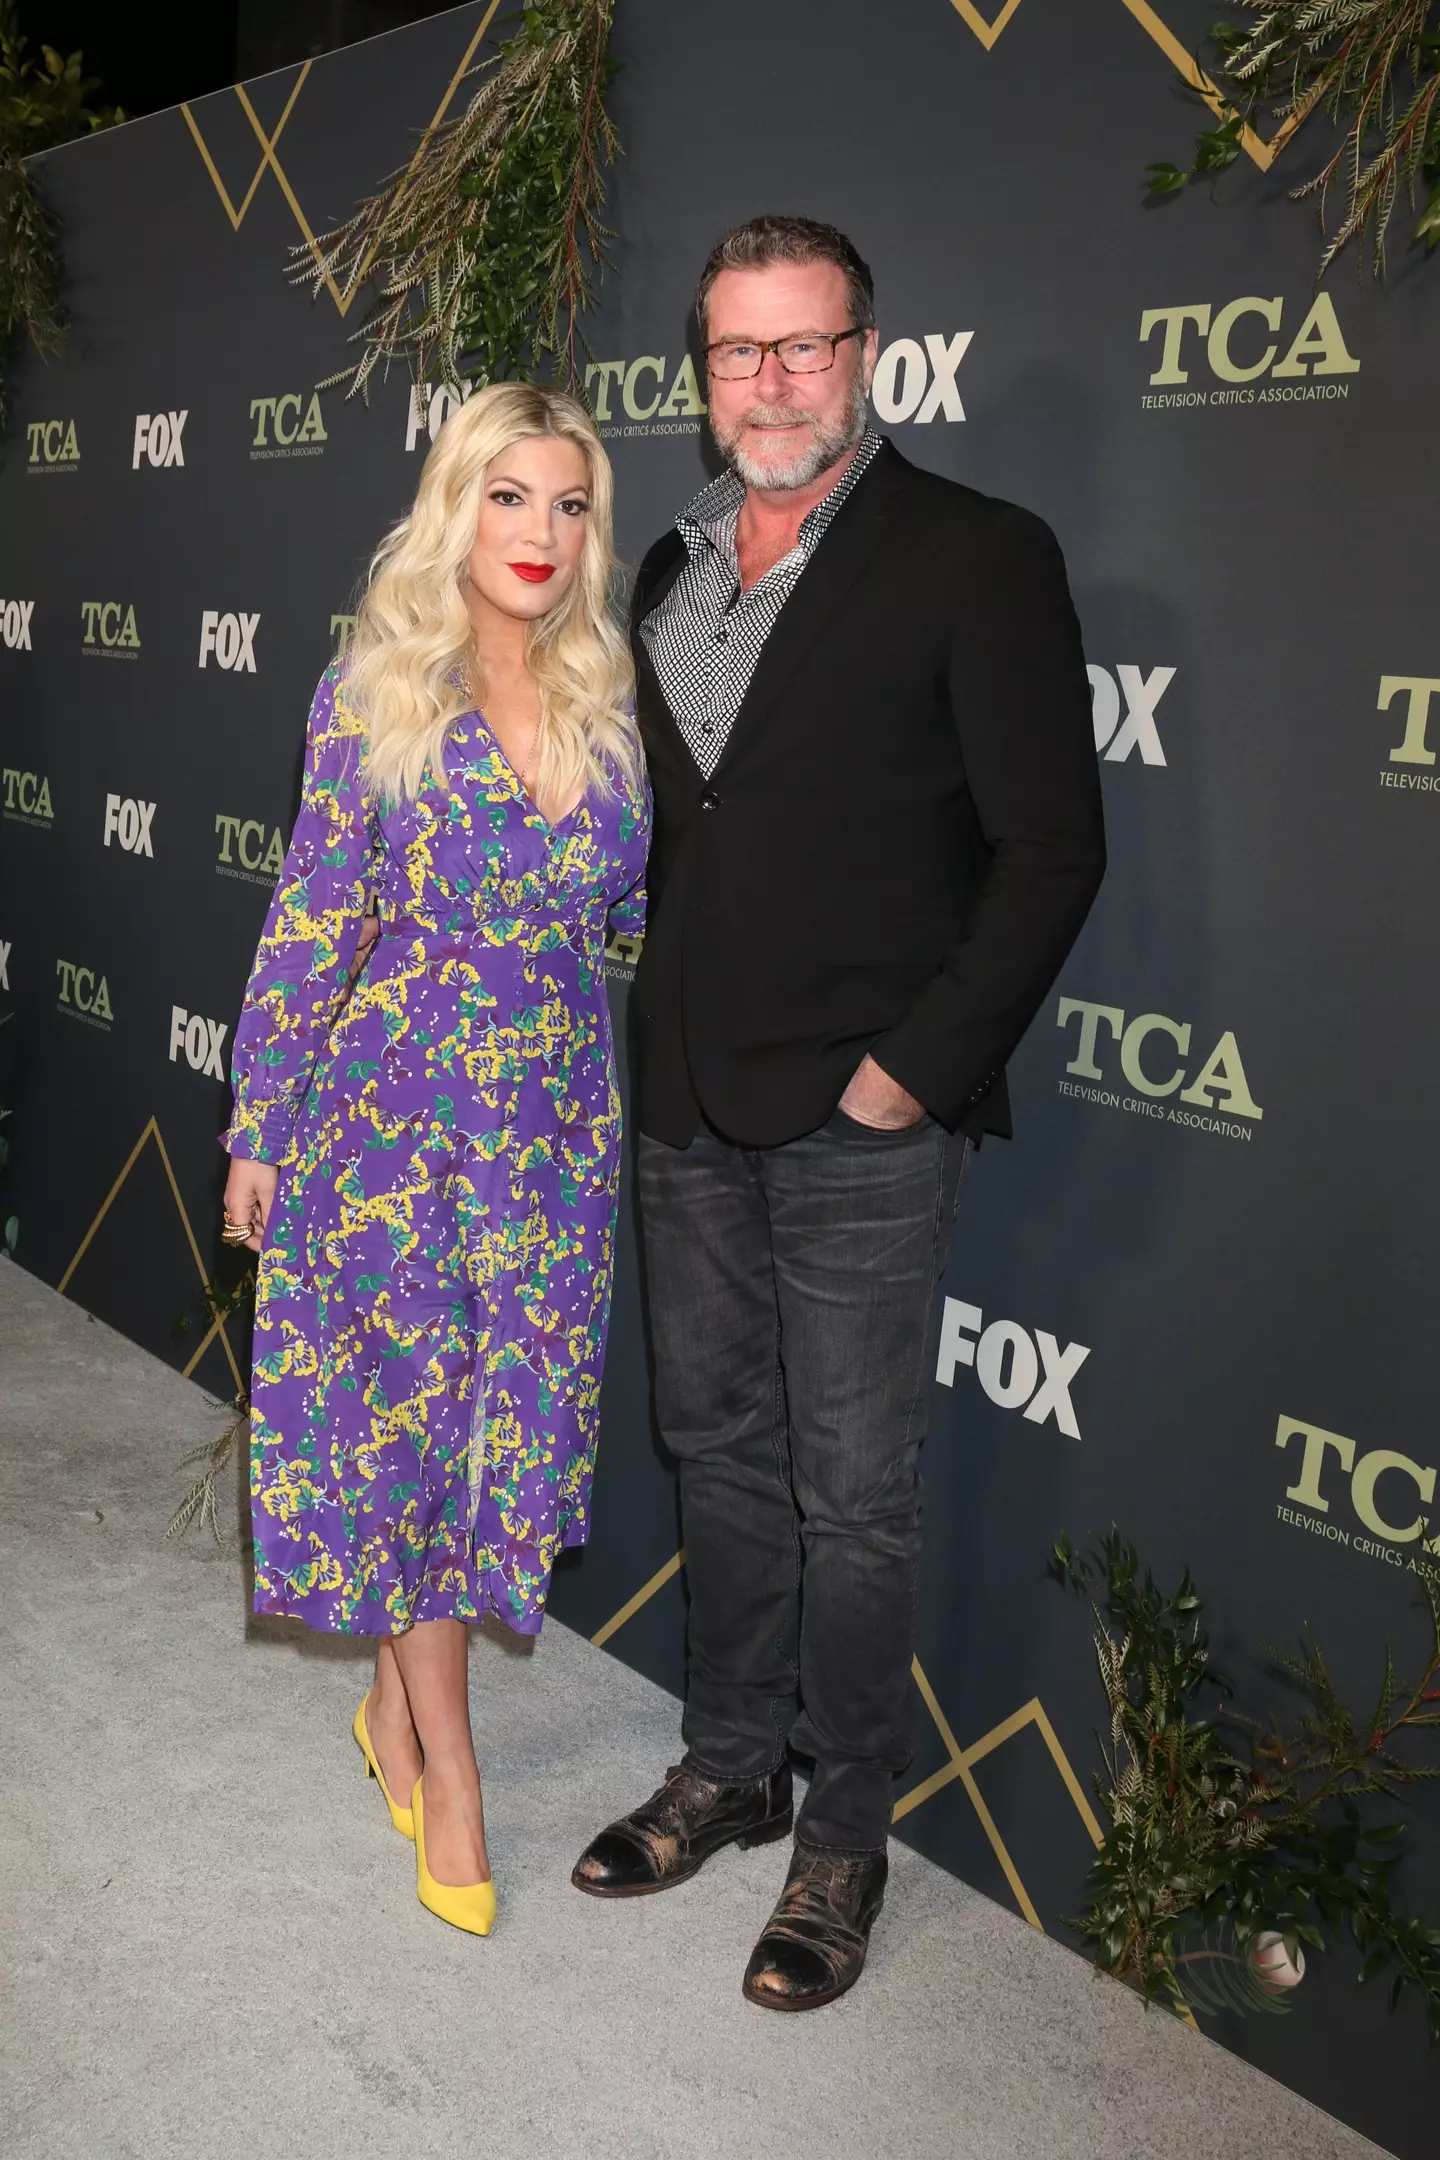 Tori Spelling and Dean McDermott share five kids together.